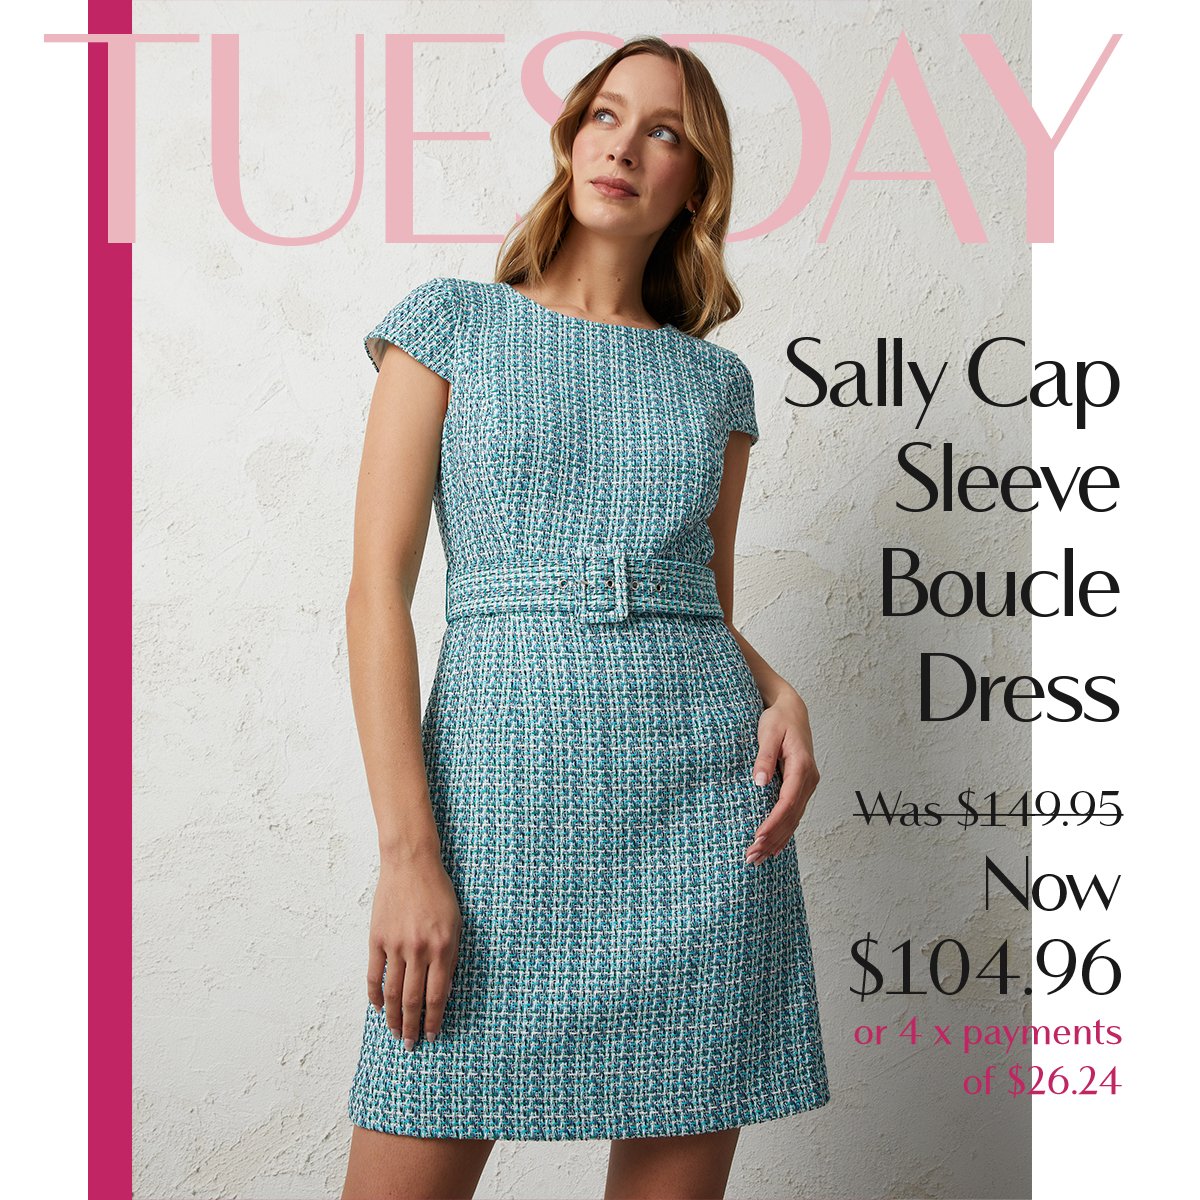 TUESDAY | Sally Cap Sleeve Boucle Dress Was $149.95 Now $104.96  or 4 x payments of $26.24